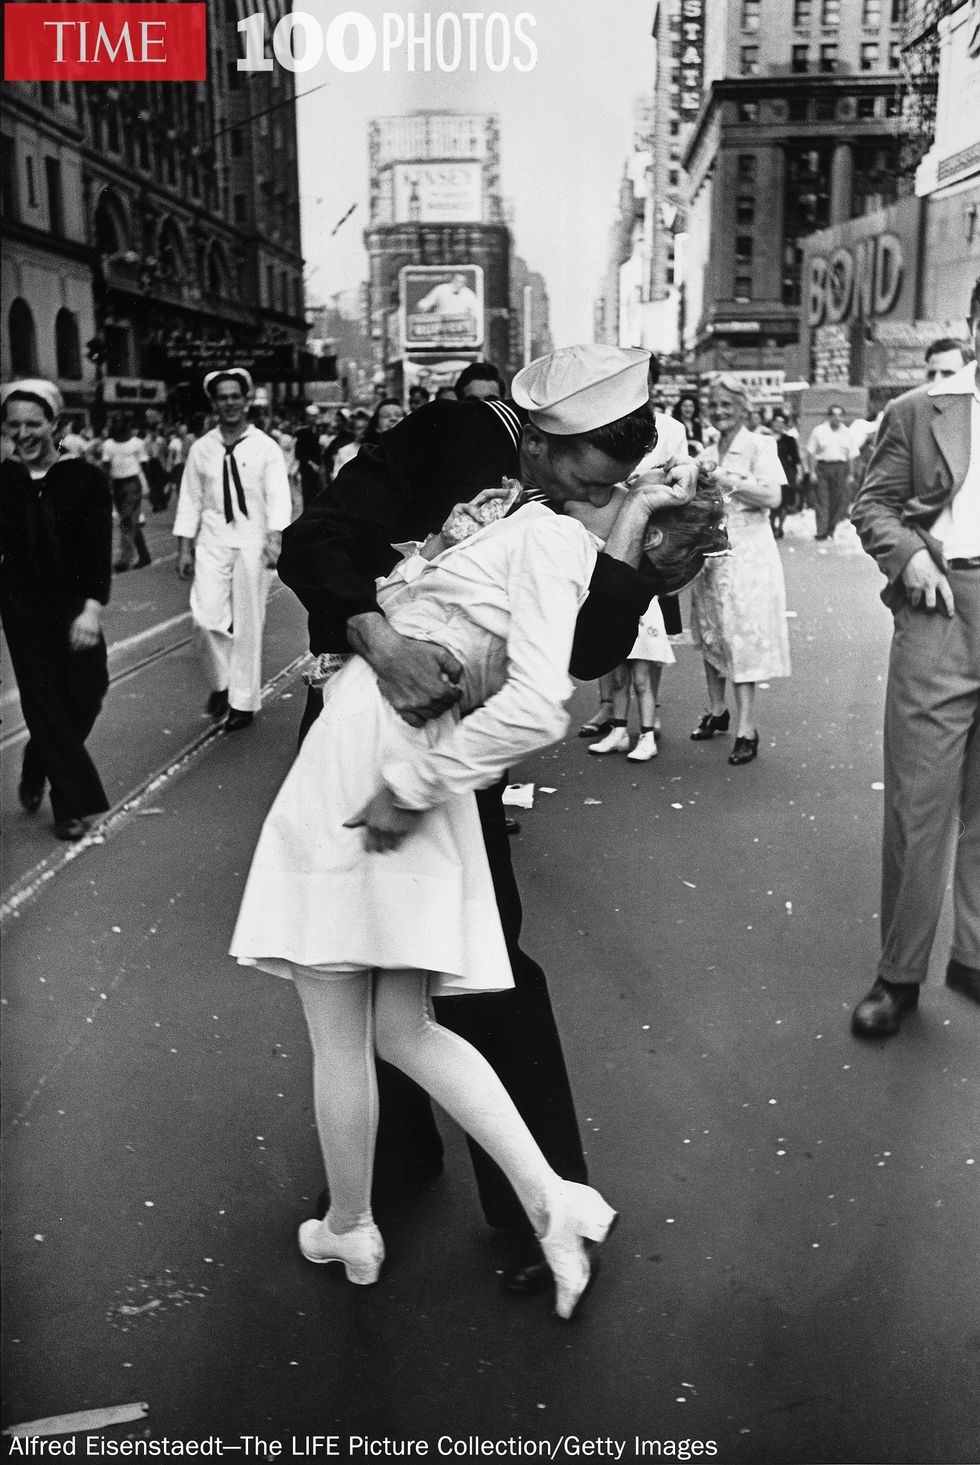 V-J Day in Times Square by Alfred Eisenstaedt